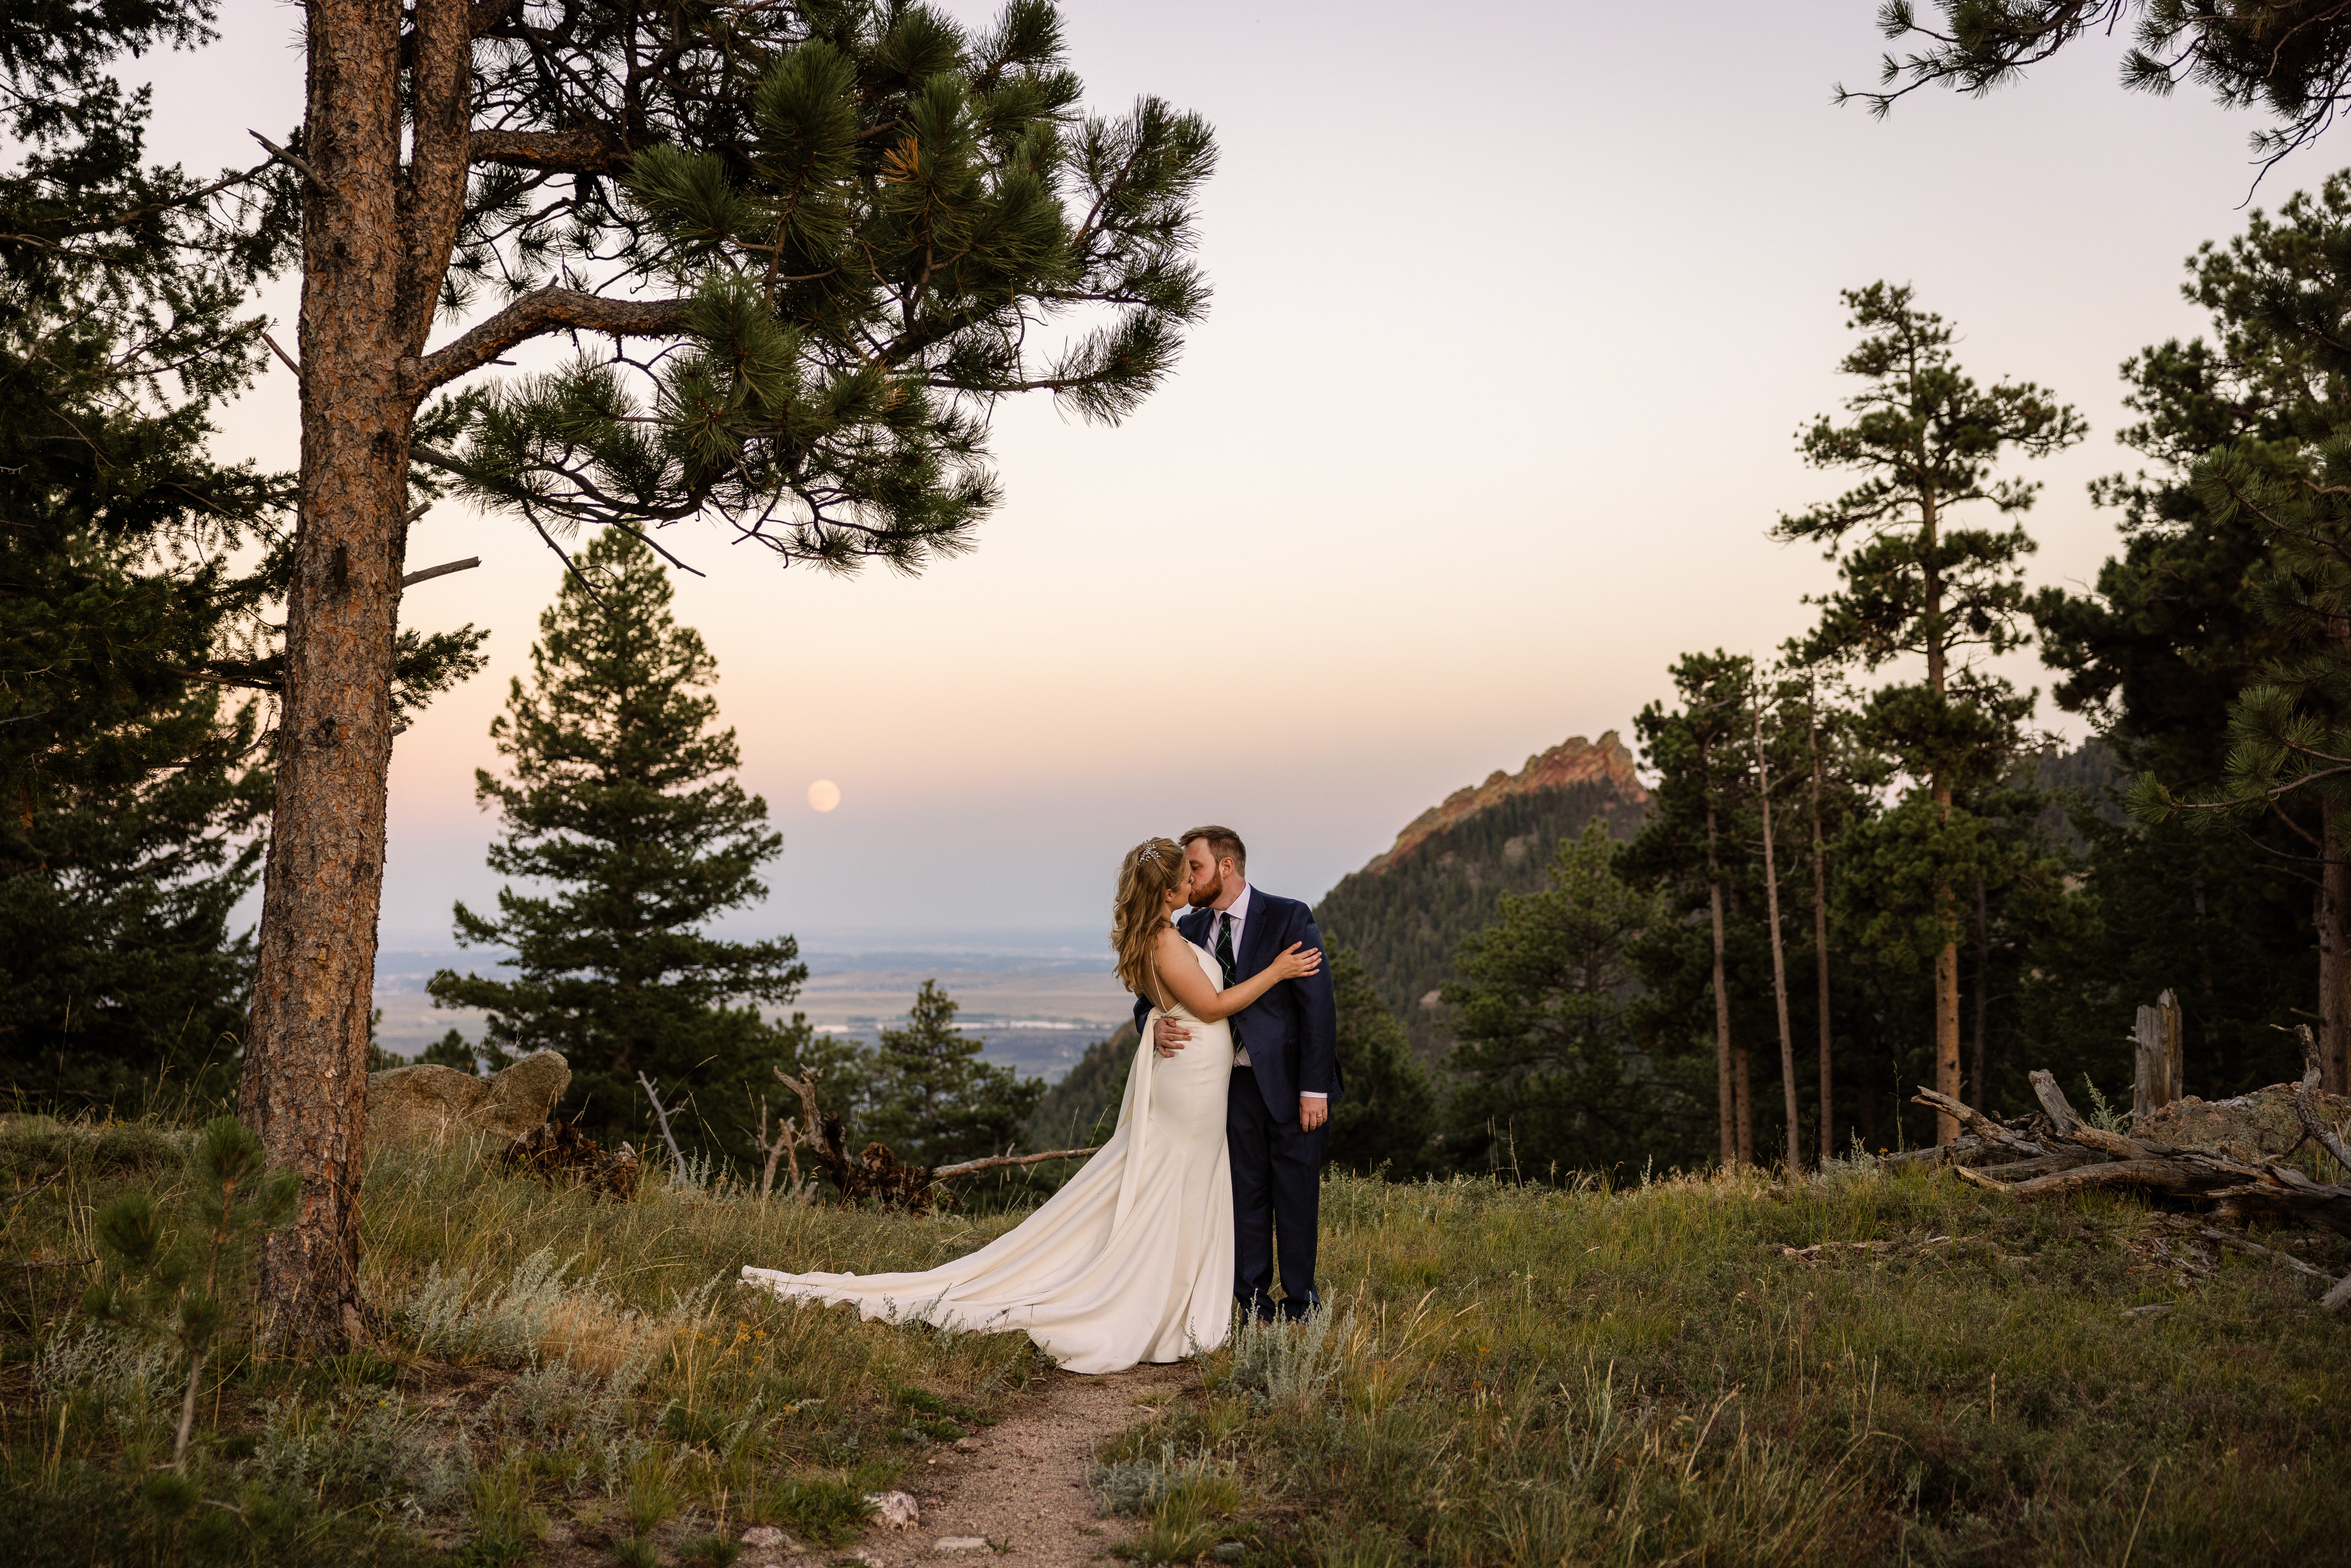 The bride and groom kissing at sunset, on their wedding day at Sunrise Amphitheater!